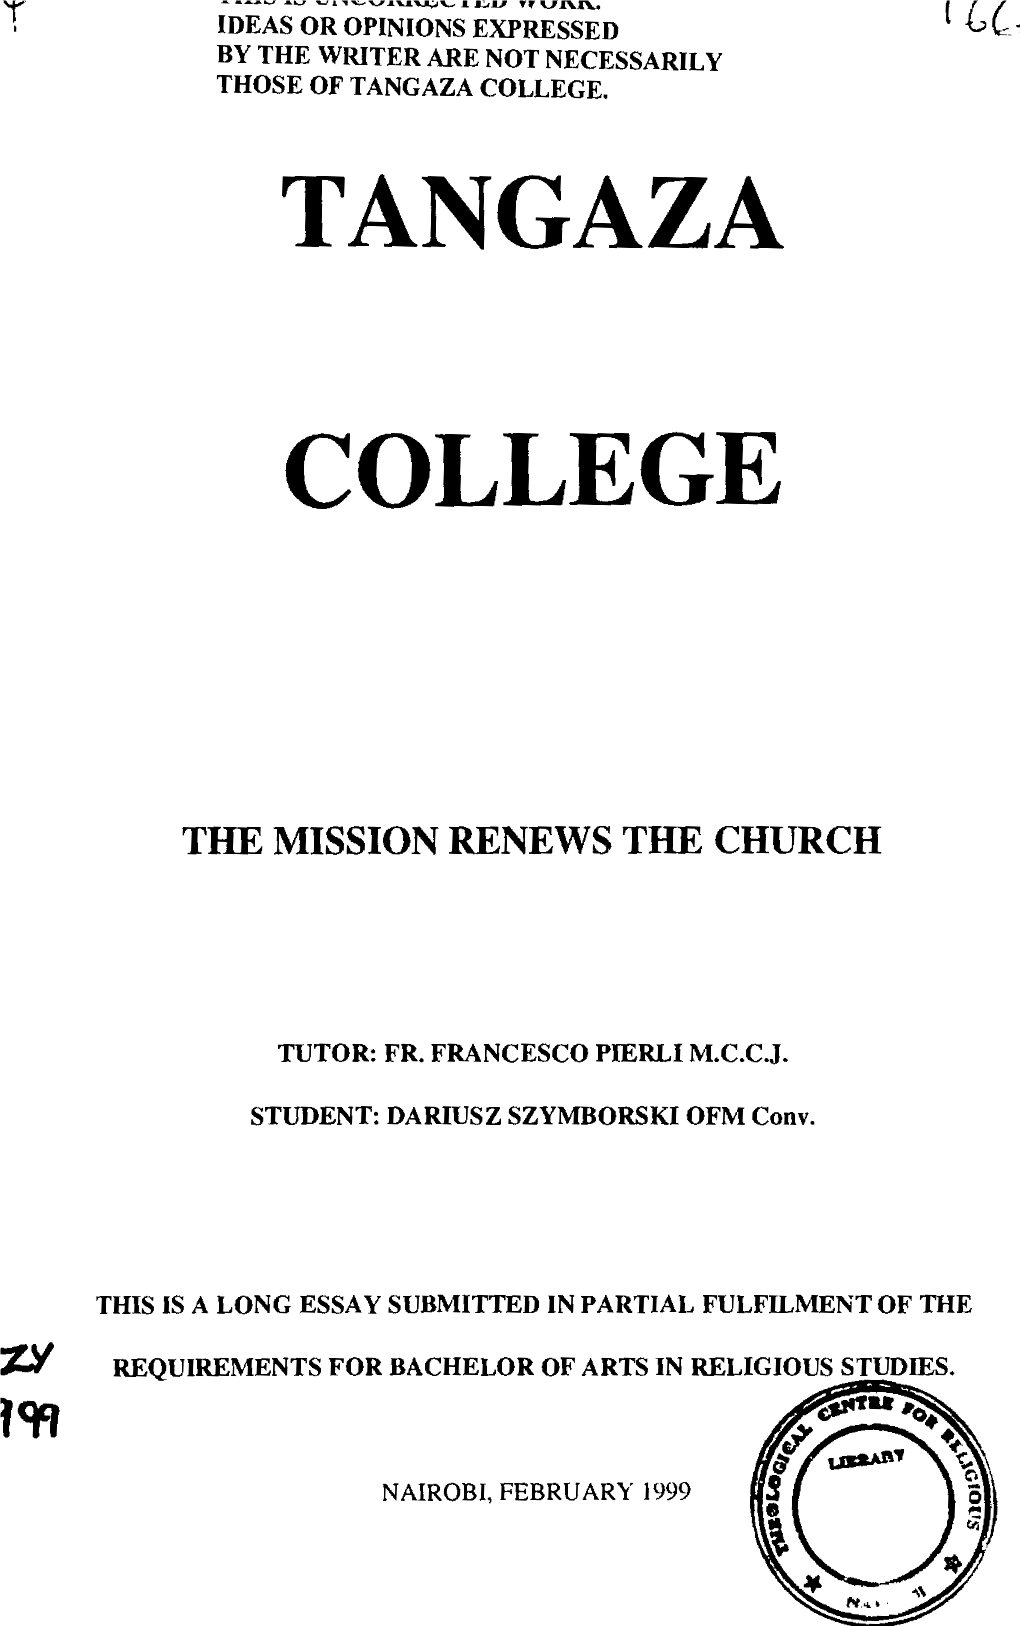 The Mission Renews the Church